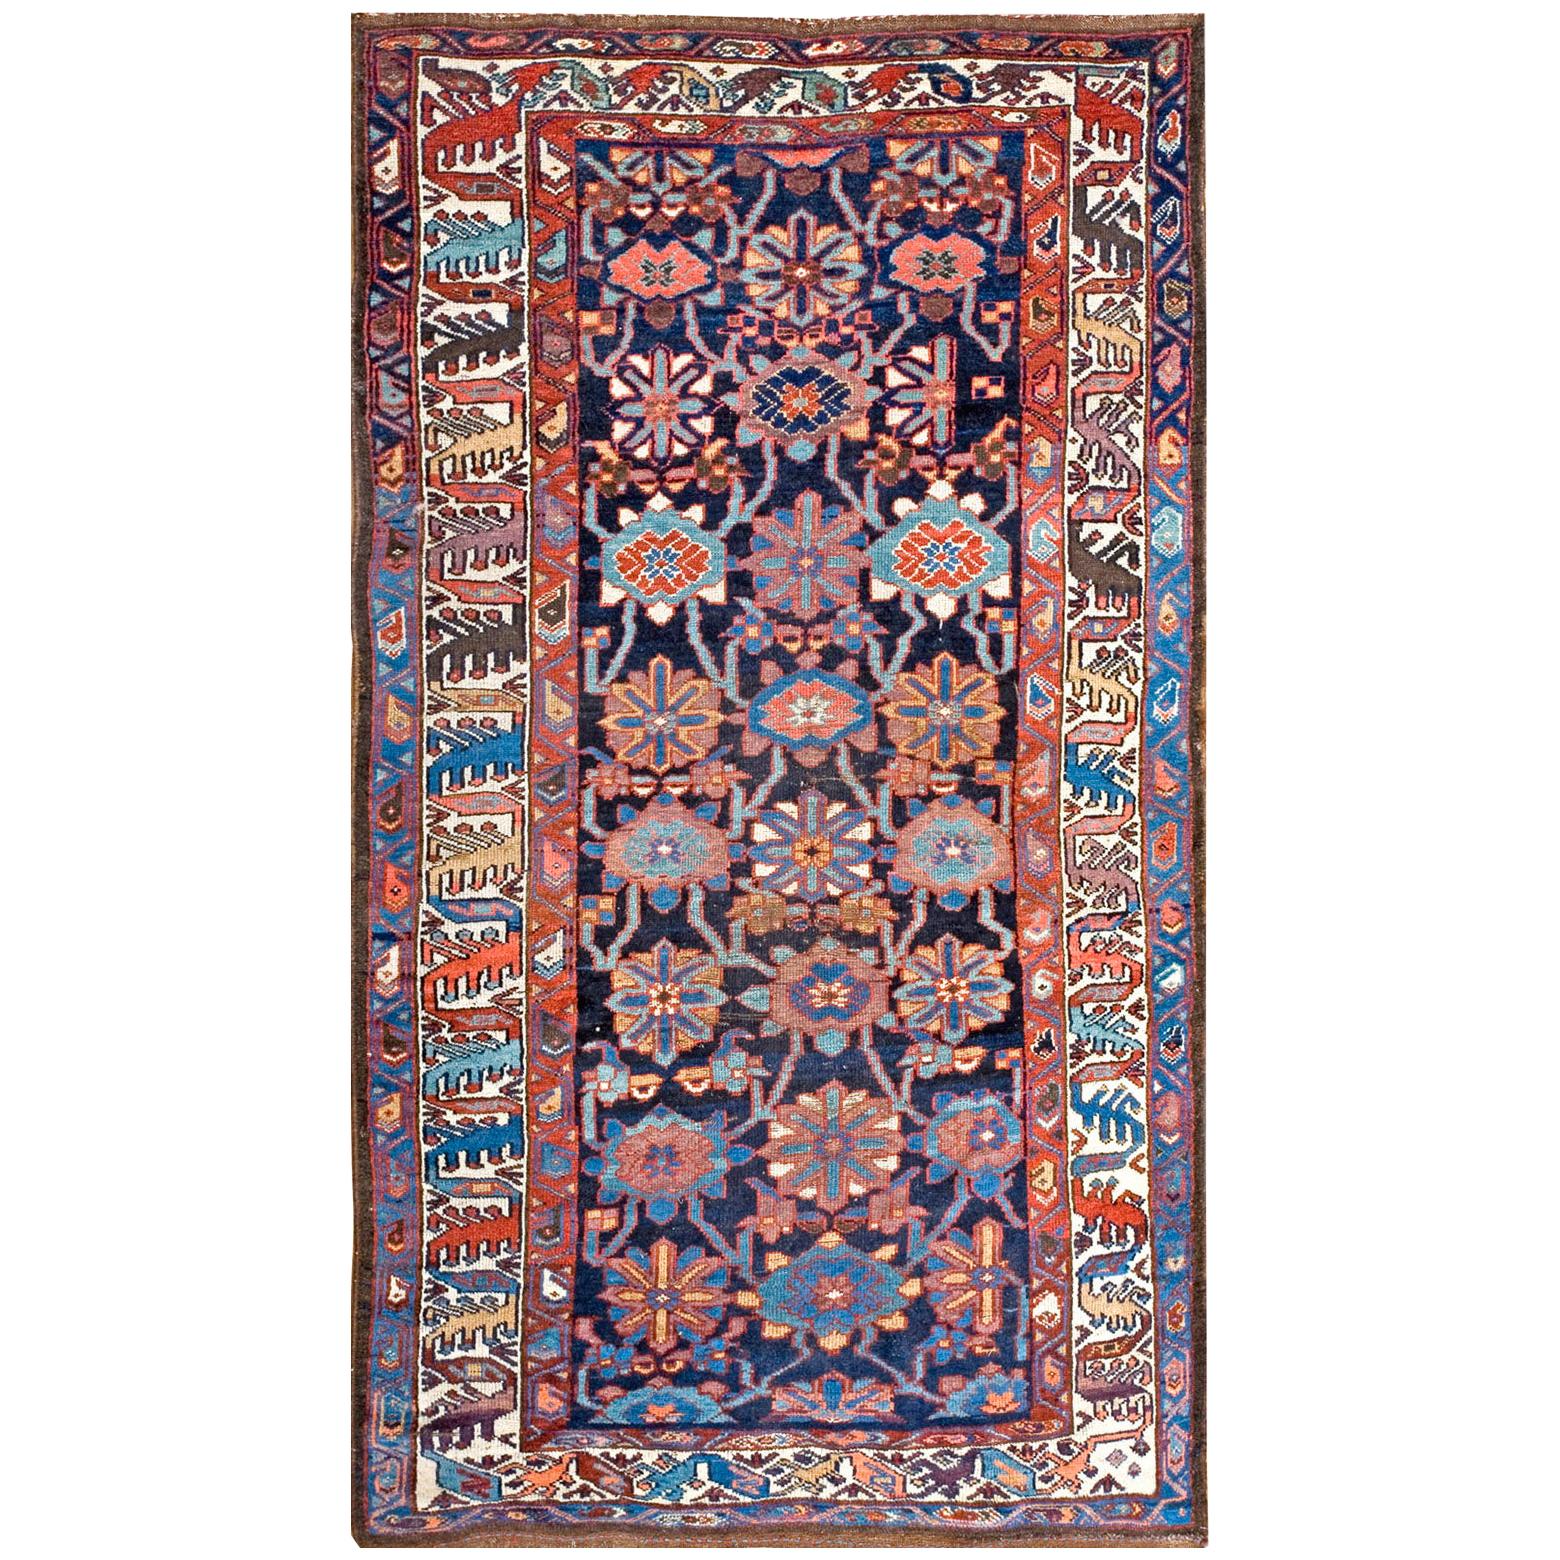 Late 19th Century NW Persian Carpet ( 4'4" x 7'8" - 132 x 233 cm )  For Sale